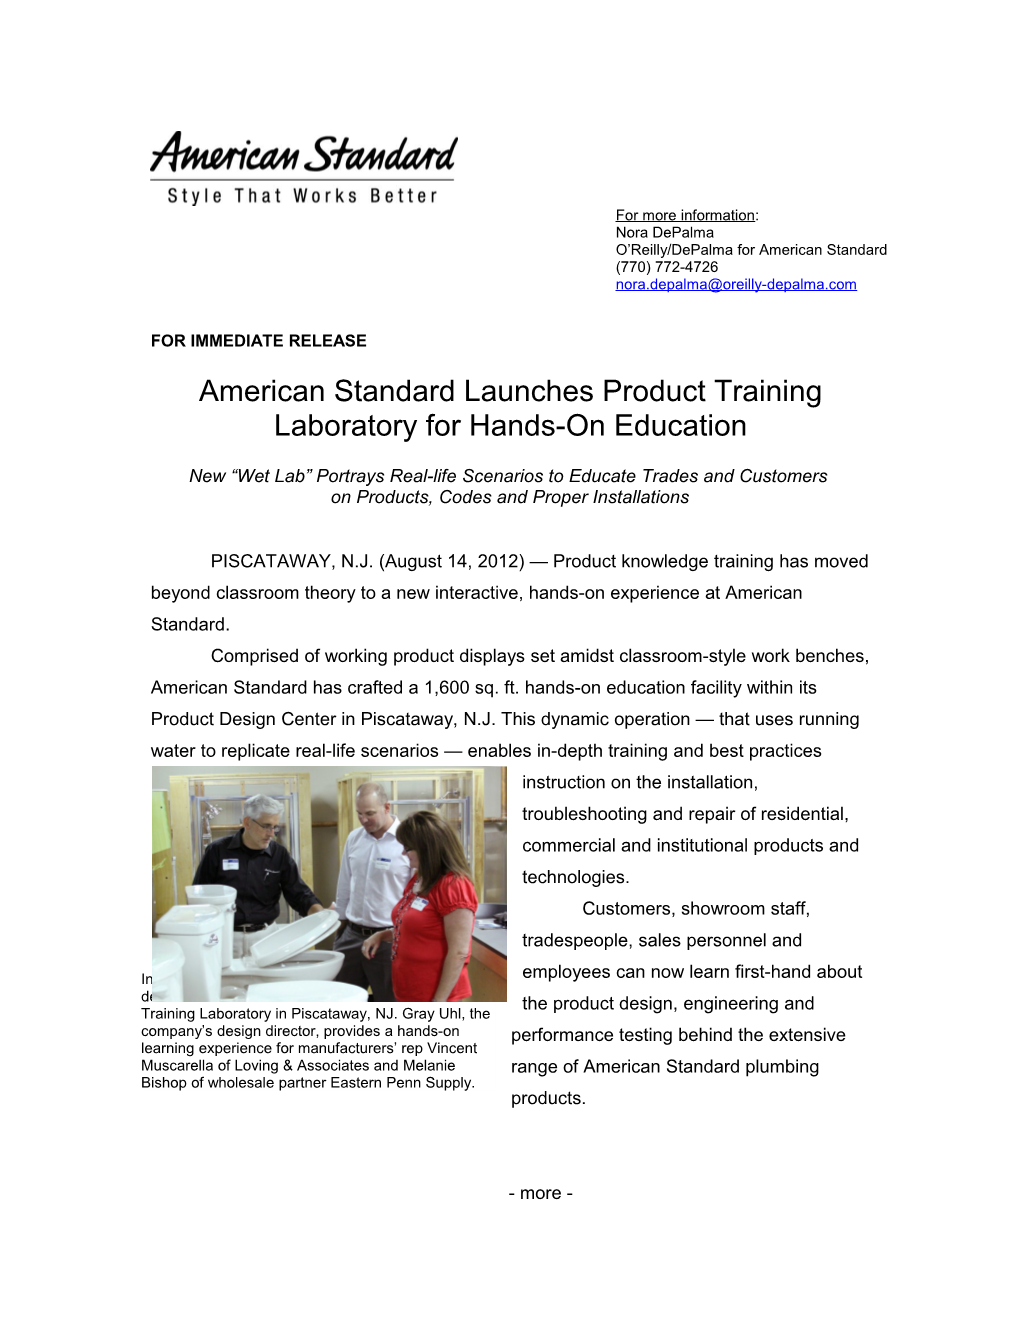 American Standard Launches Product Training Laboratory for Hands-On Education 1-1-1